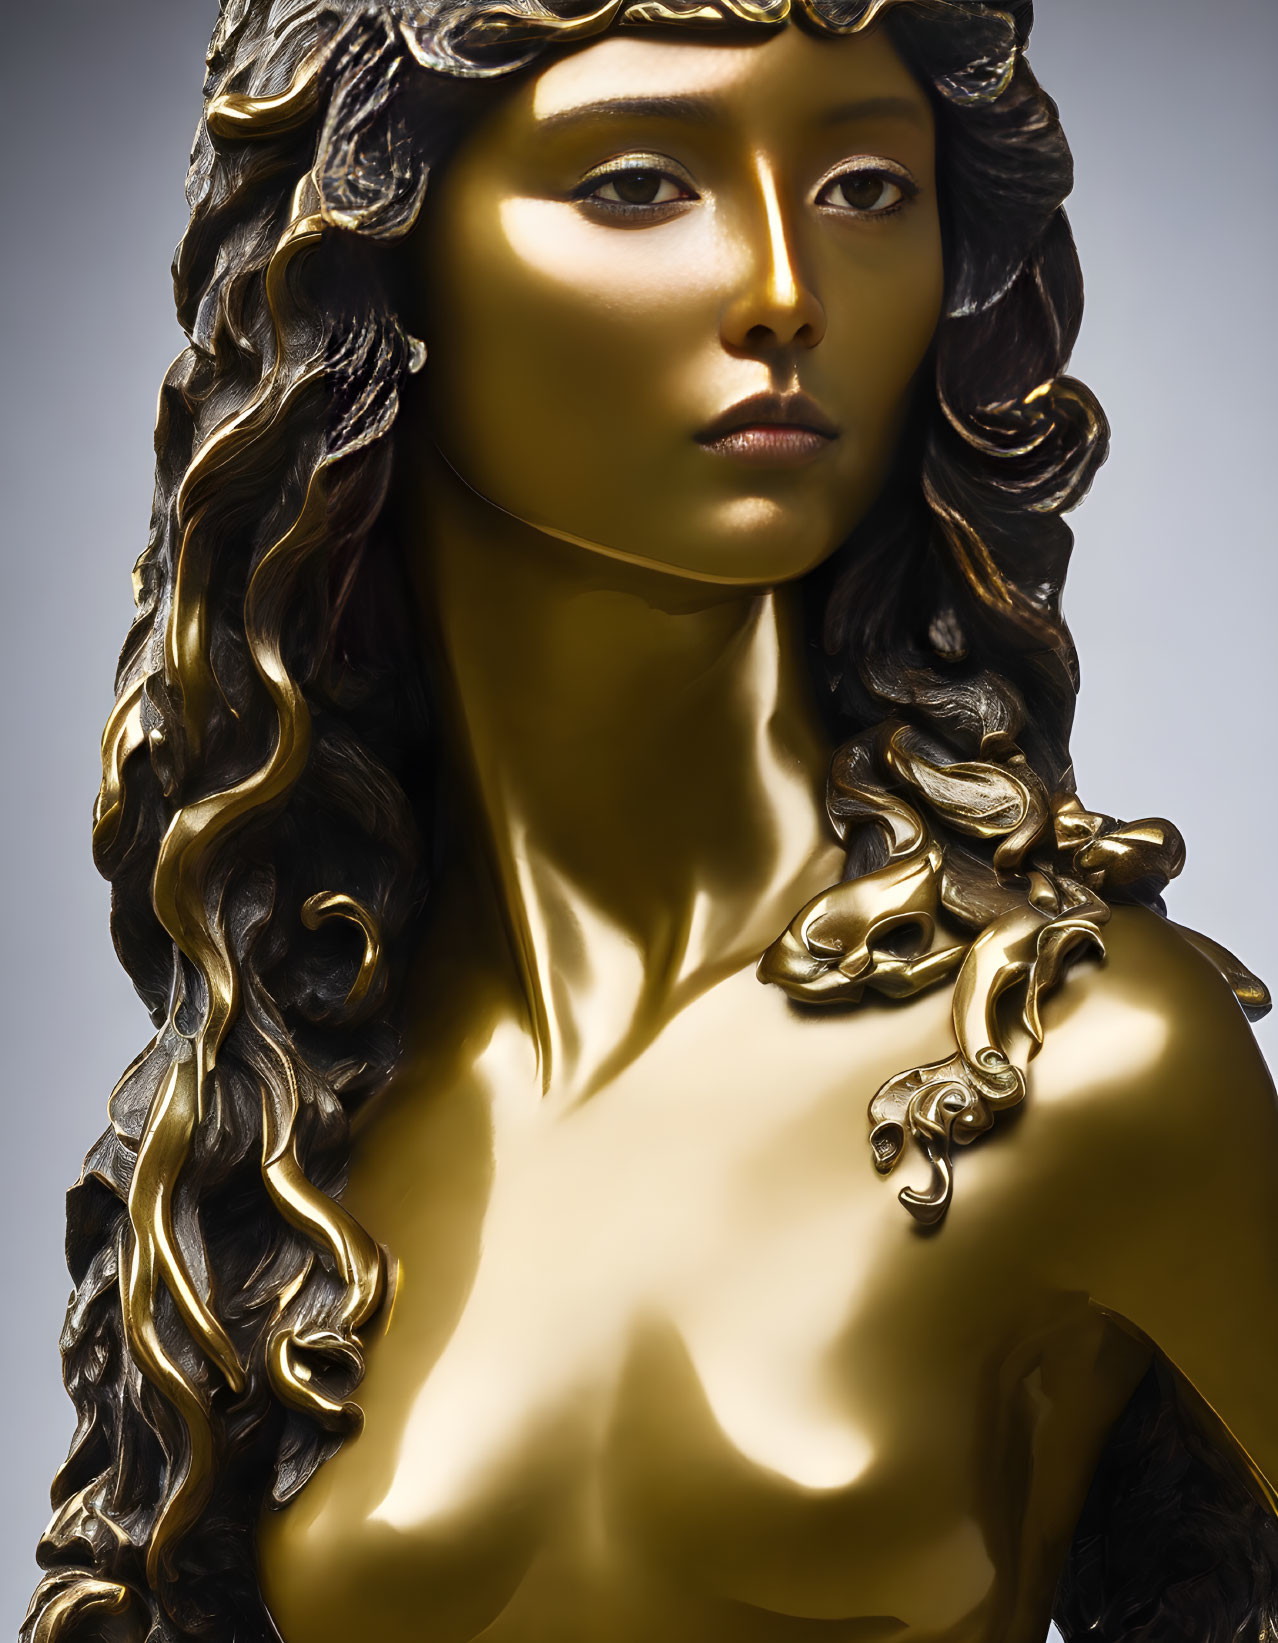 Intricately detailed golden statue of a serene woman